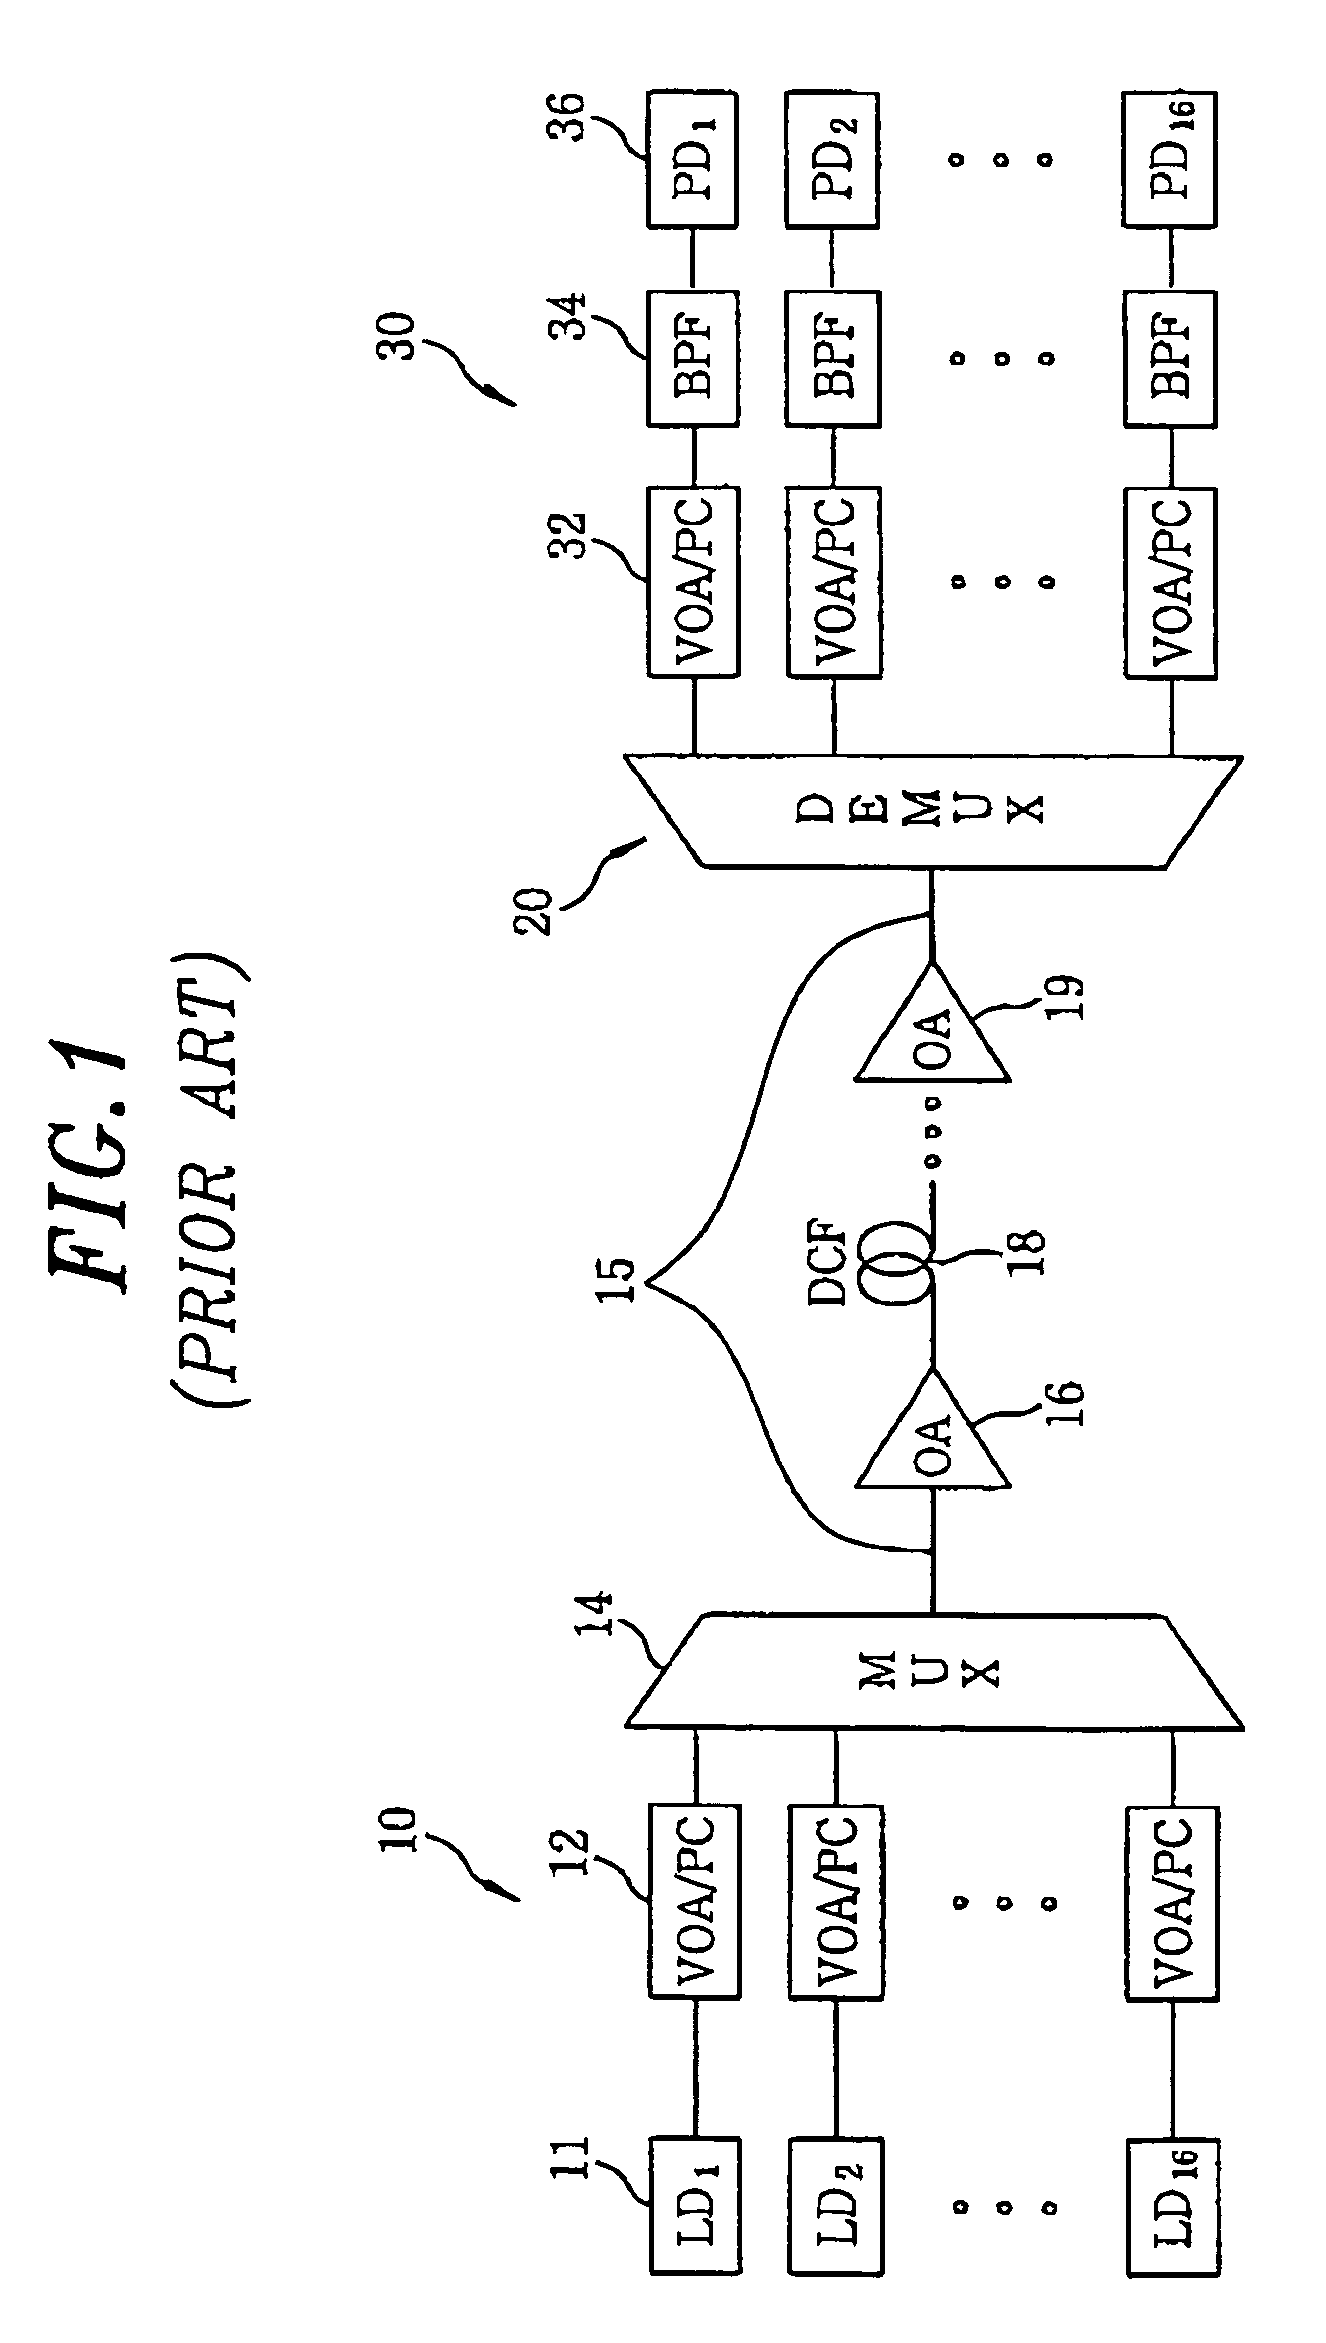 WDM-PON having optical source of self-injection locked fabry-perot laser diode